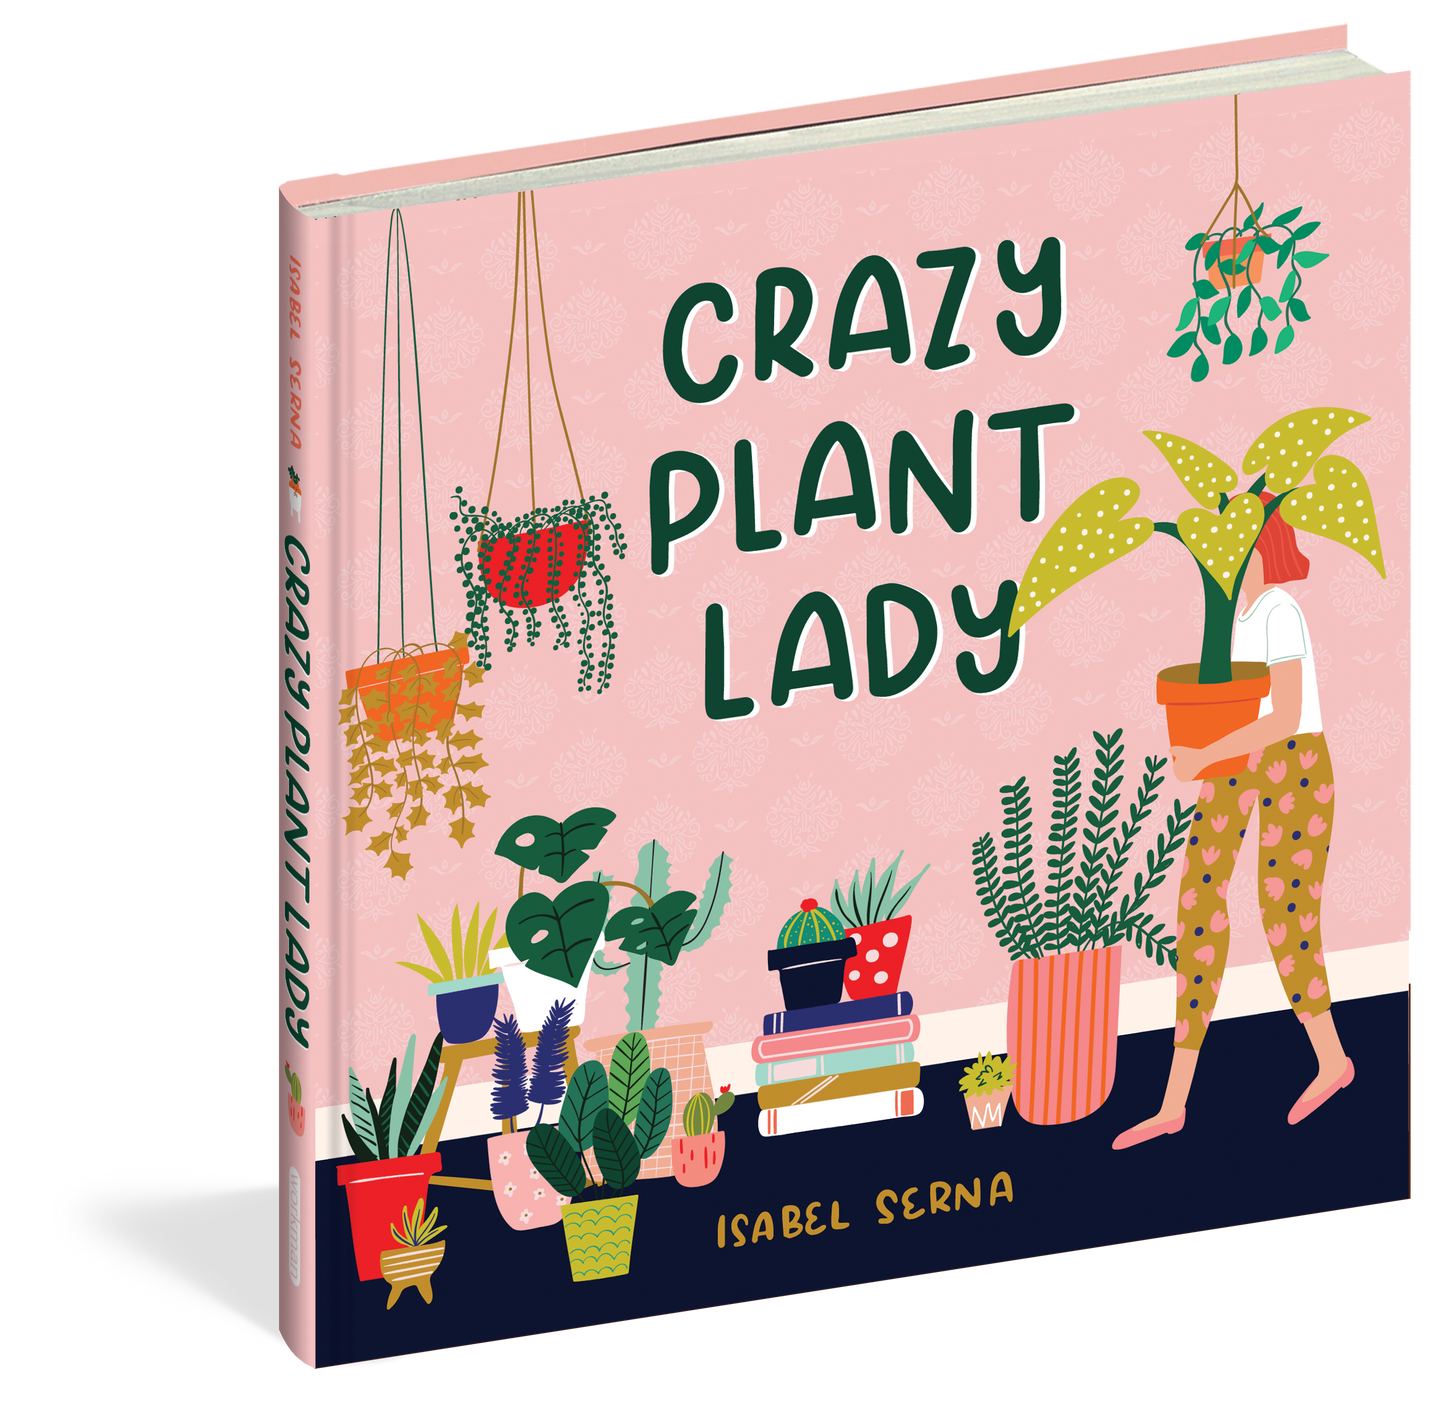 cover of book shows a woman carrying a potted plant to add to the rest of the potted plants, title, and author's name